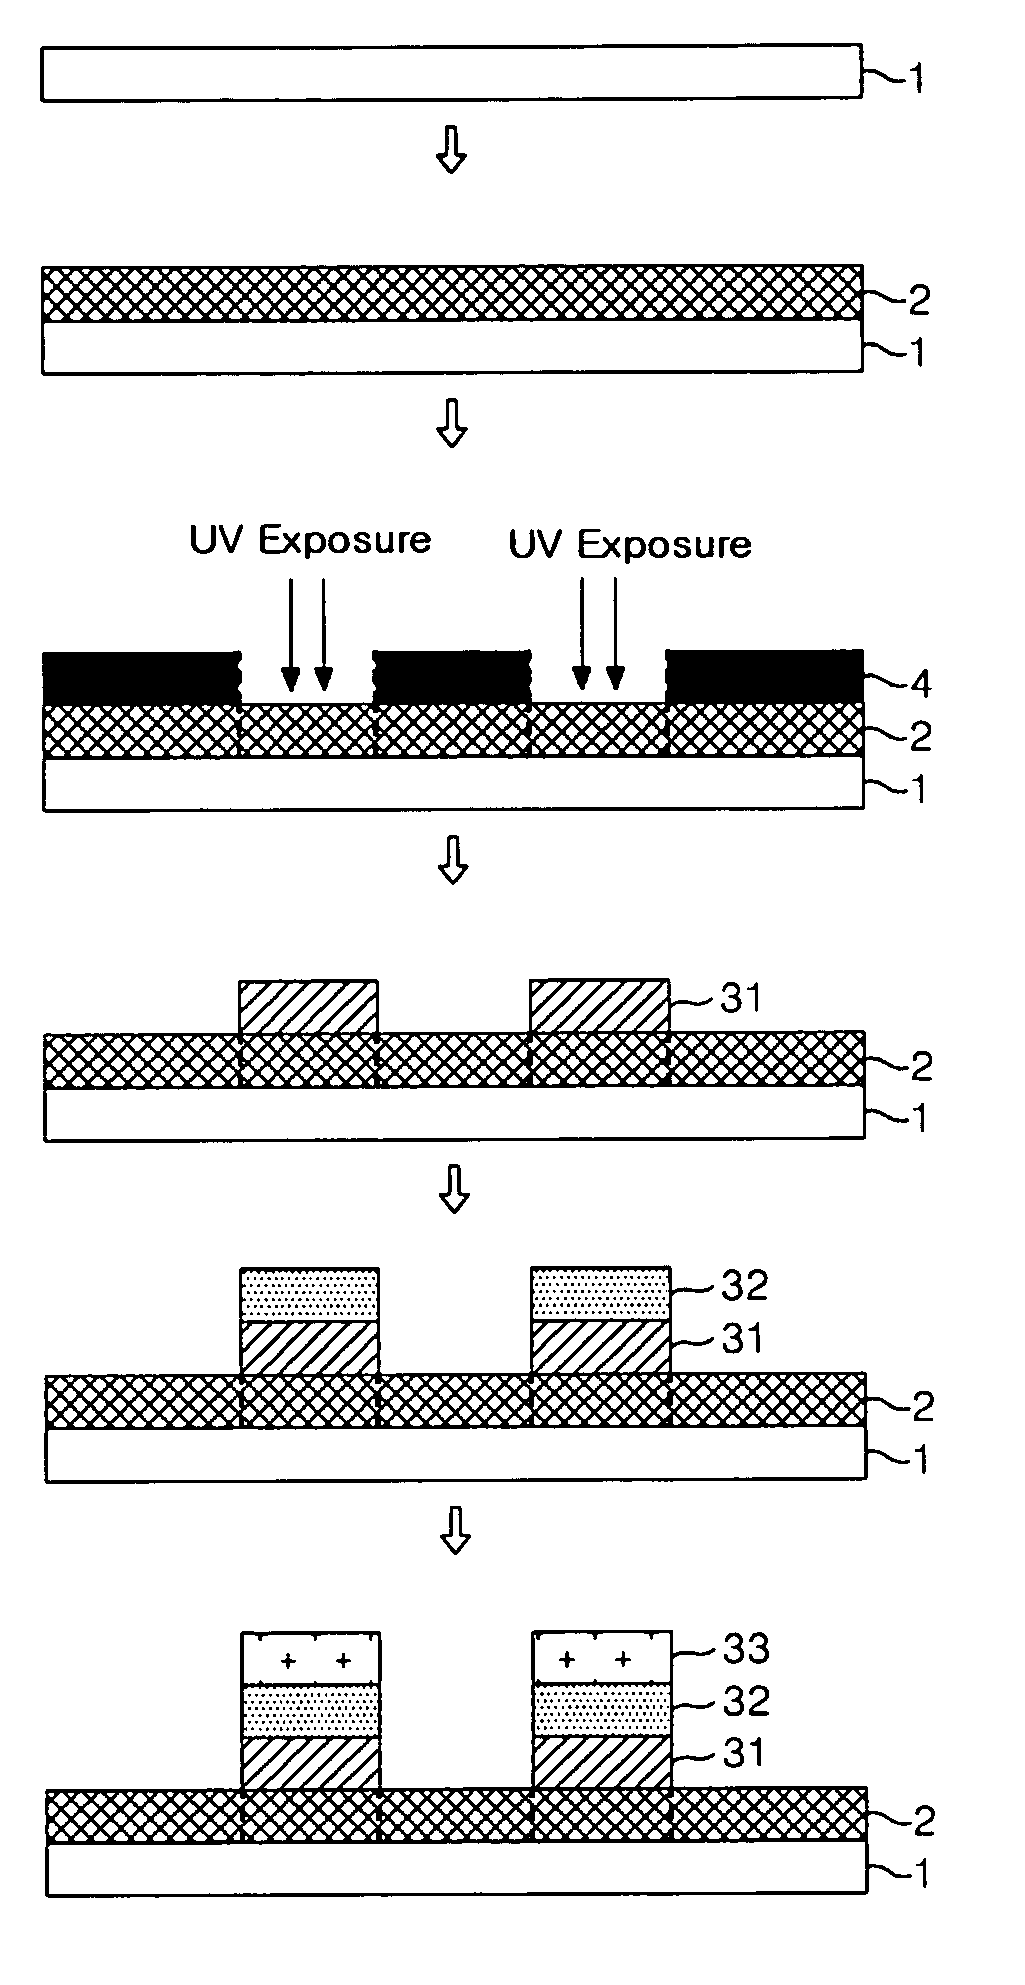 Novel black matrix, method for the preparation thereof, flat display device and electromagnetic interference filter employing the same